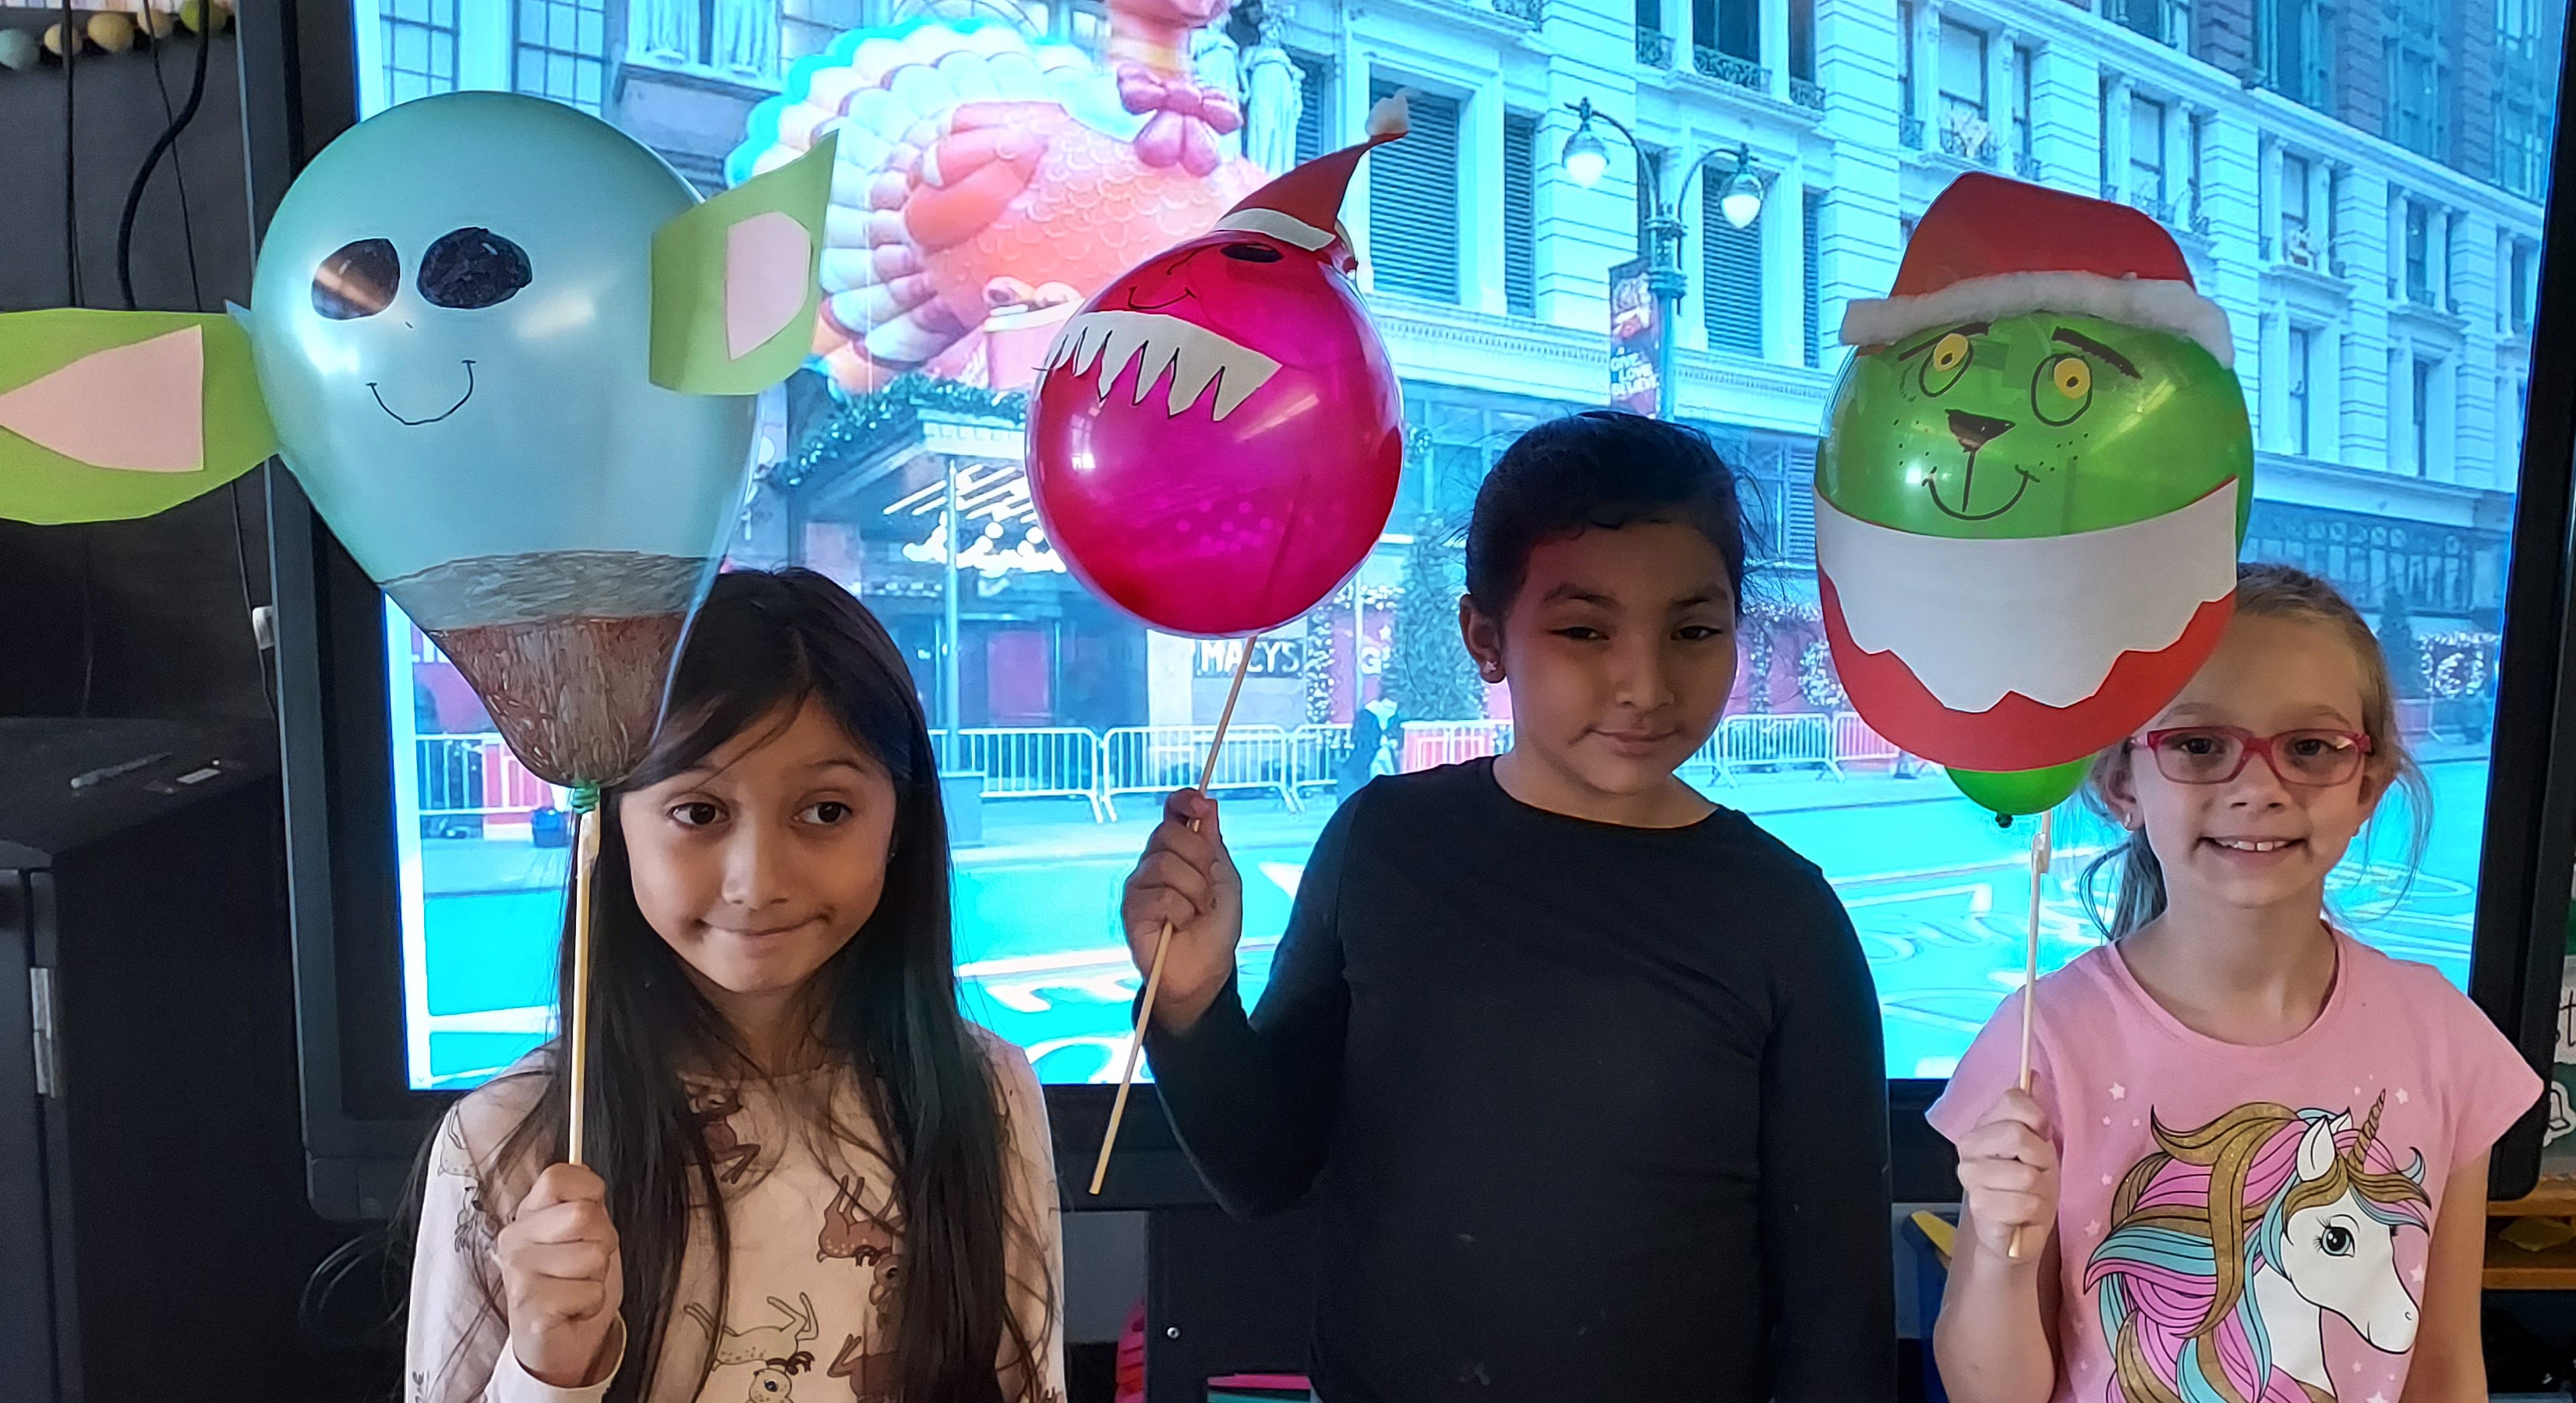 students pose with decorated balloons